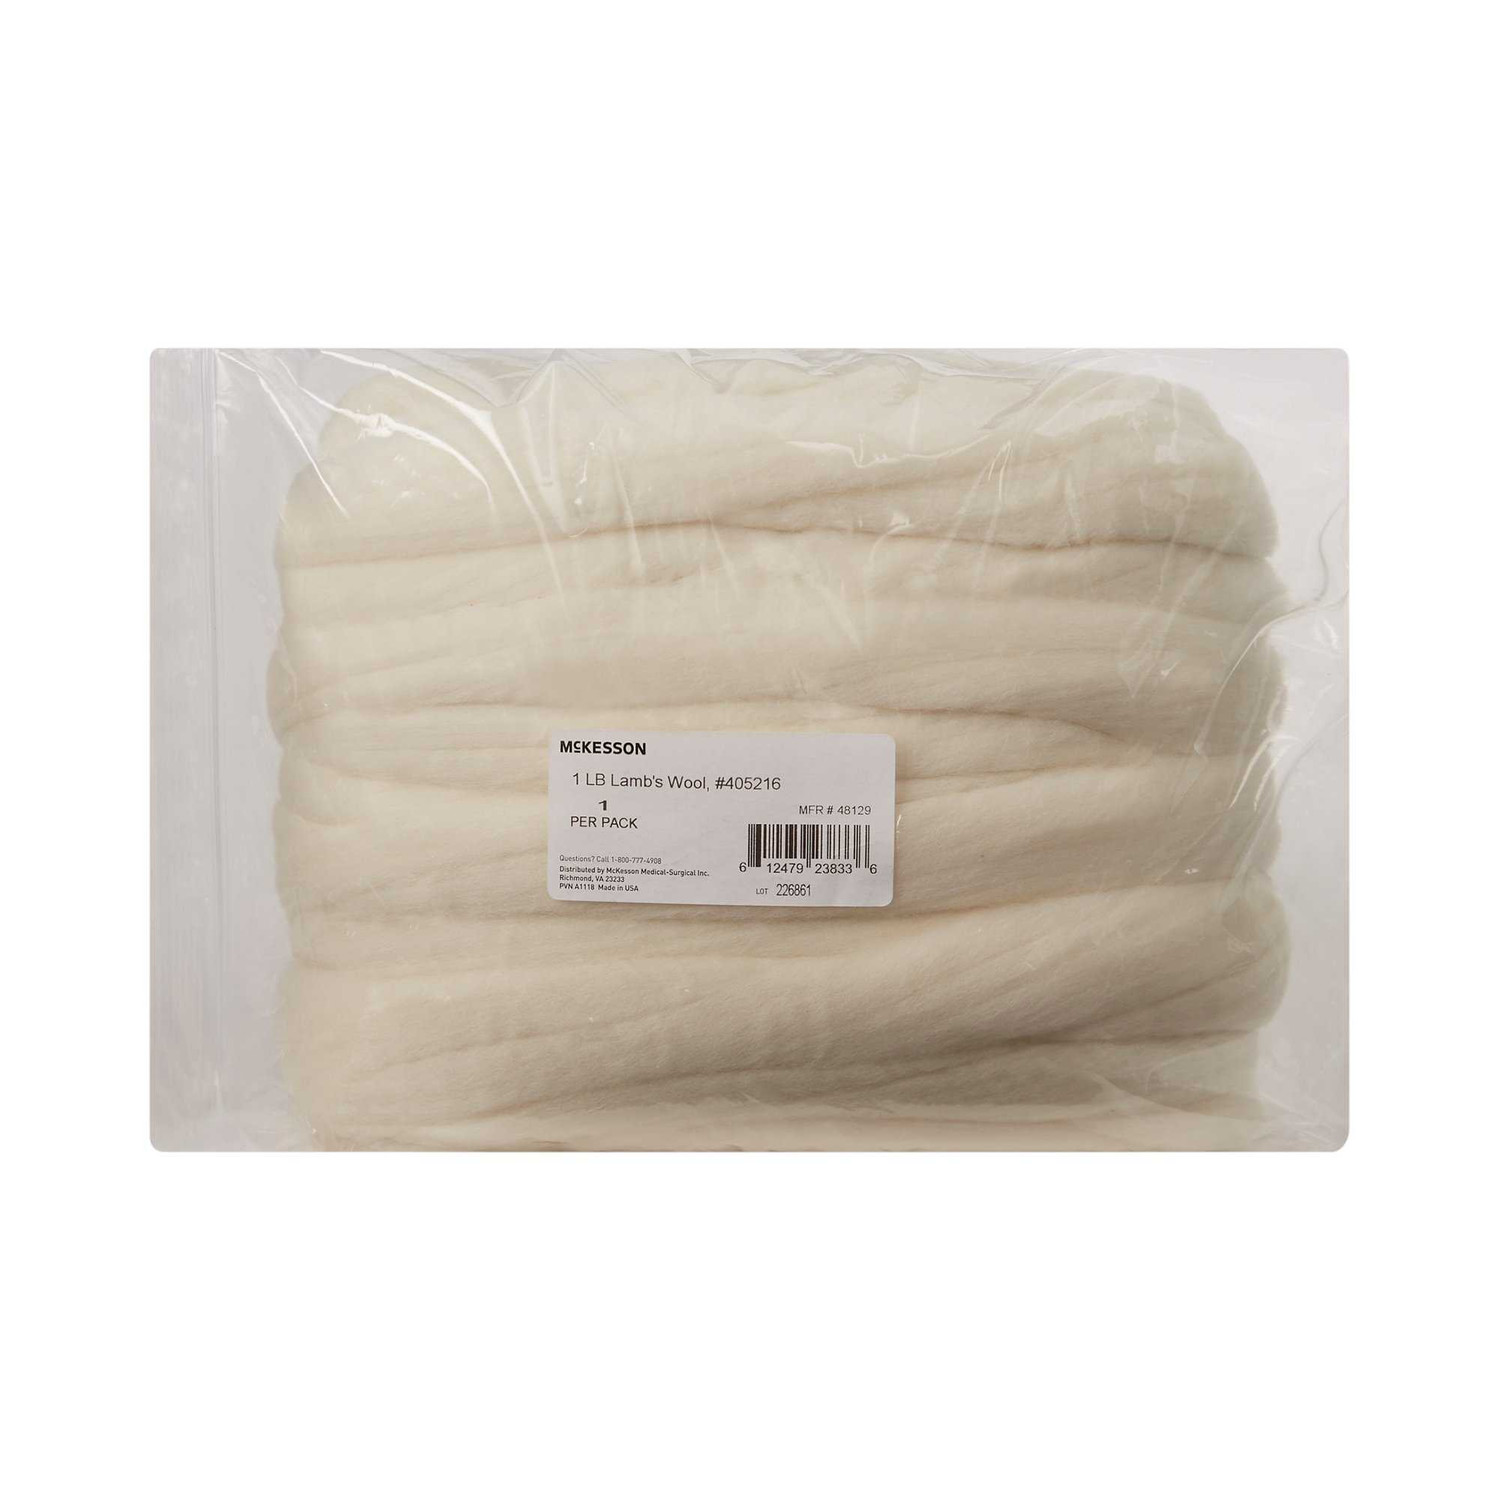 McKesson Lambs Wool One Size 900647, 12 ct, Adult Unisex